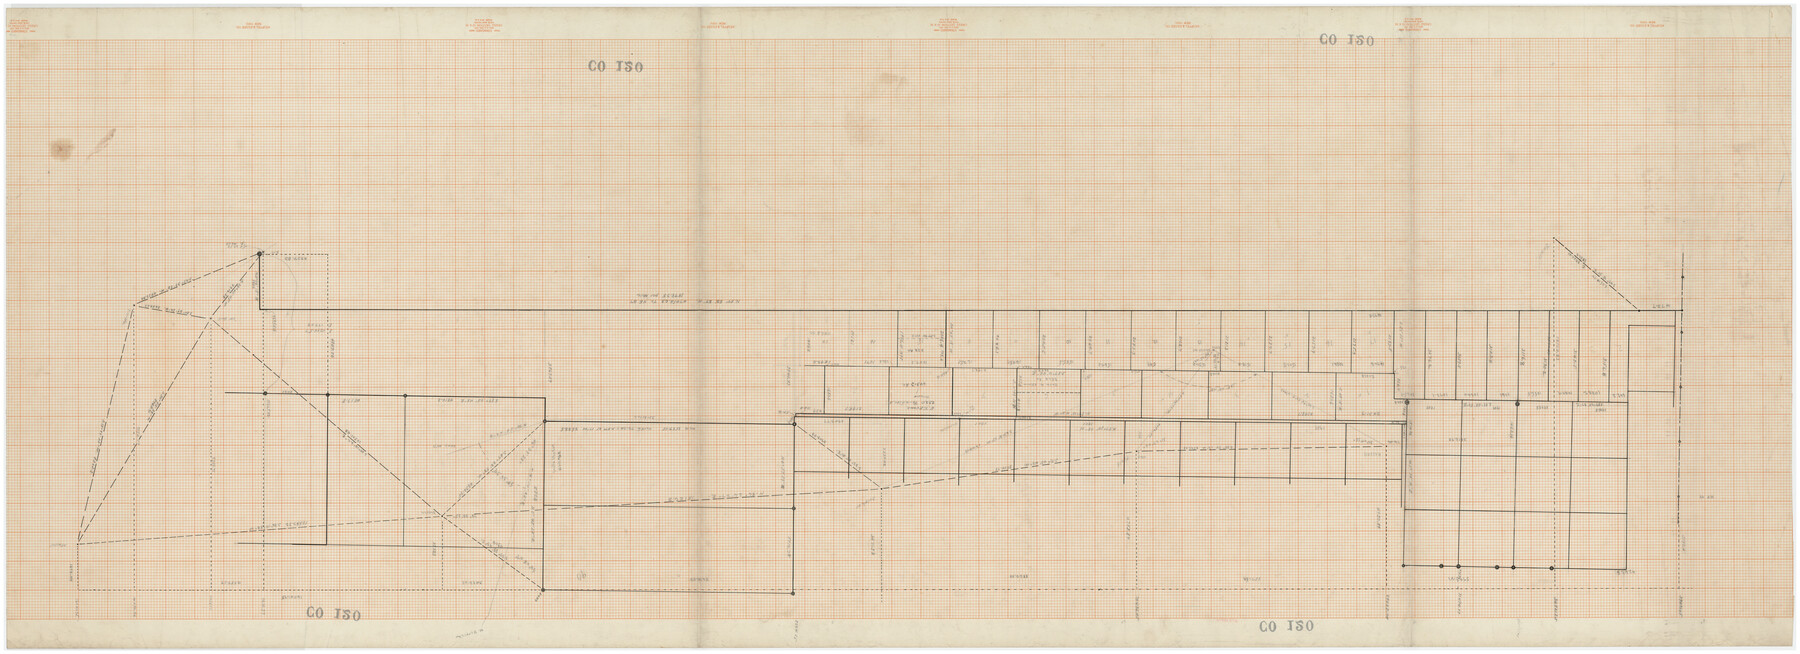 89687, [Sketch showing parts of PSL Bloks Q, L, and P], Twichell Survey Records